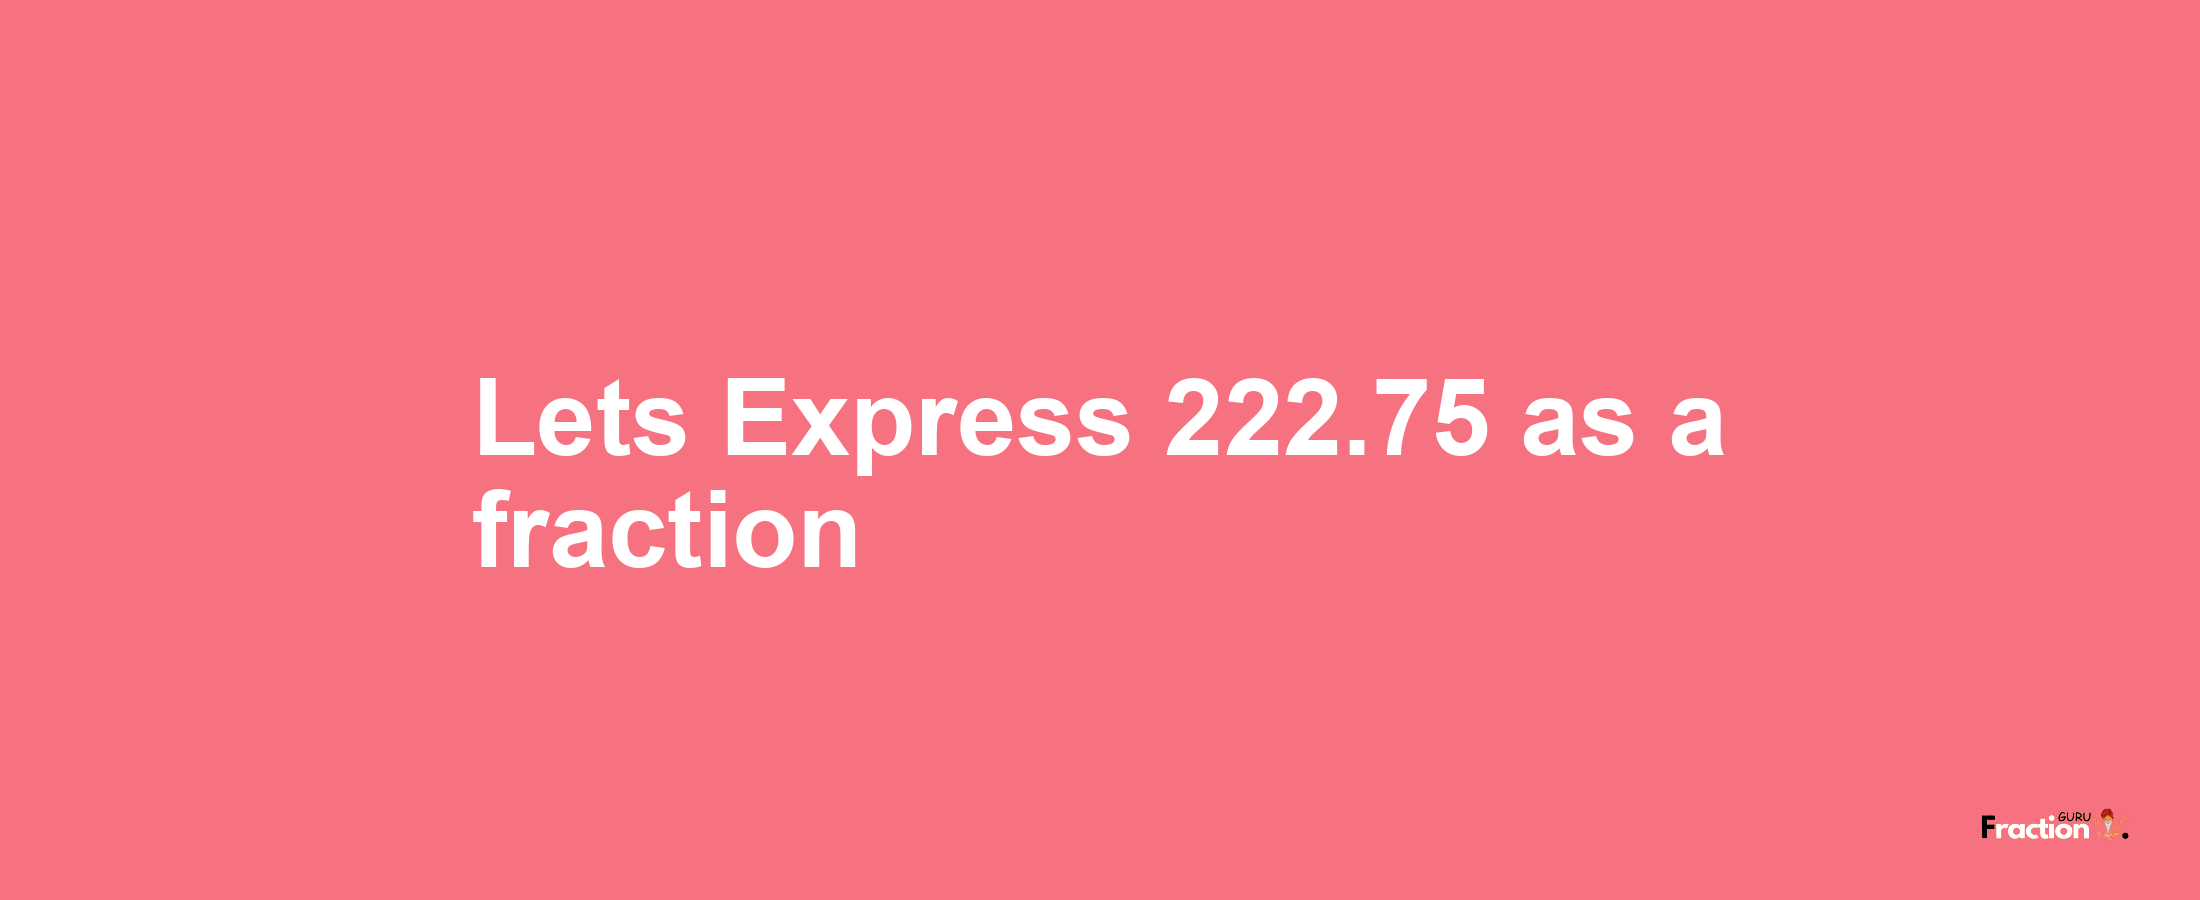 Lets Express 222.75 as afraction